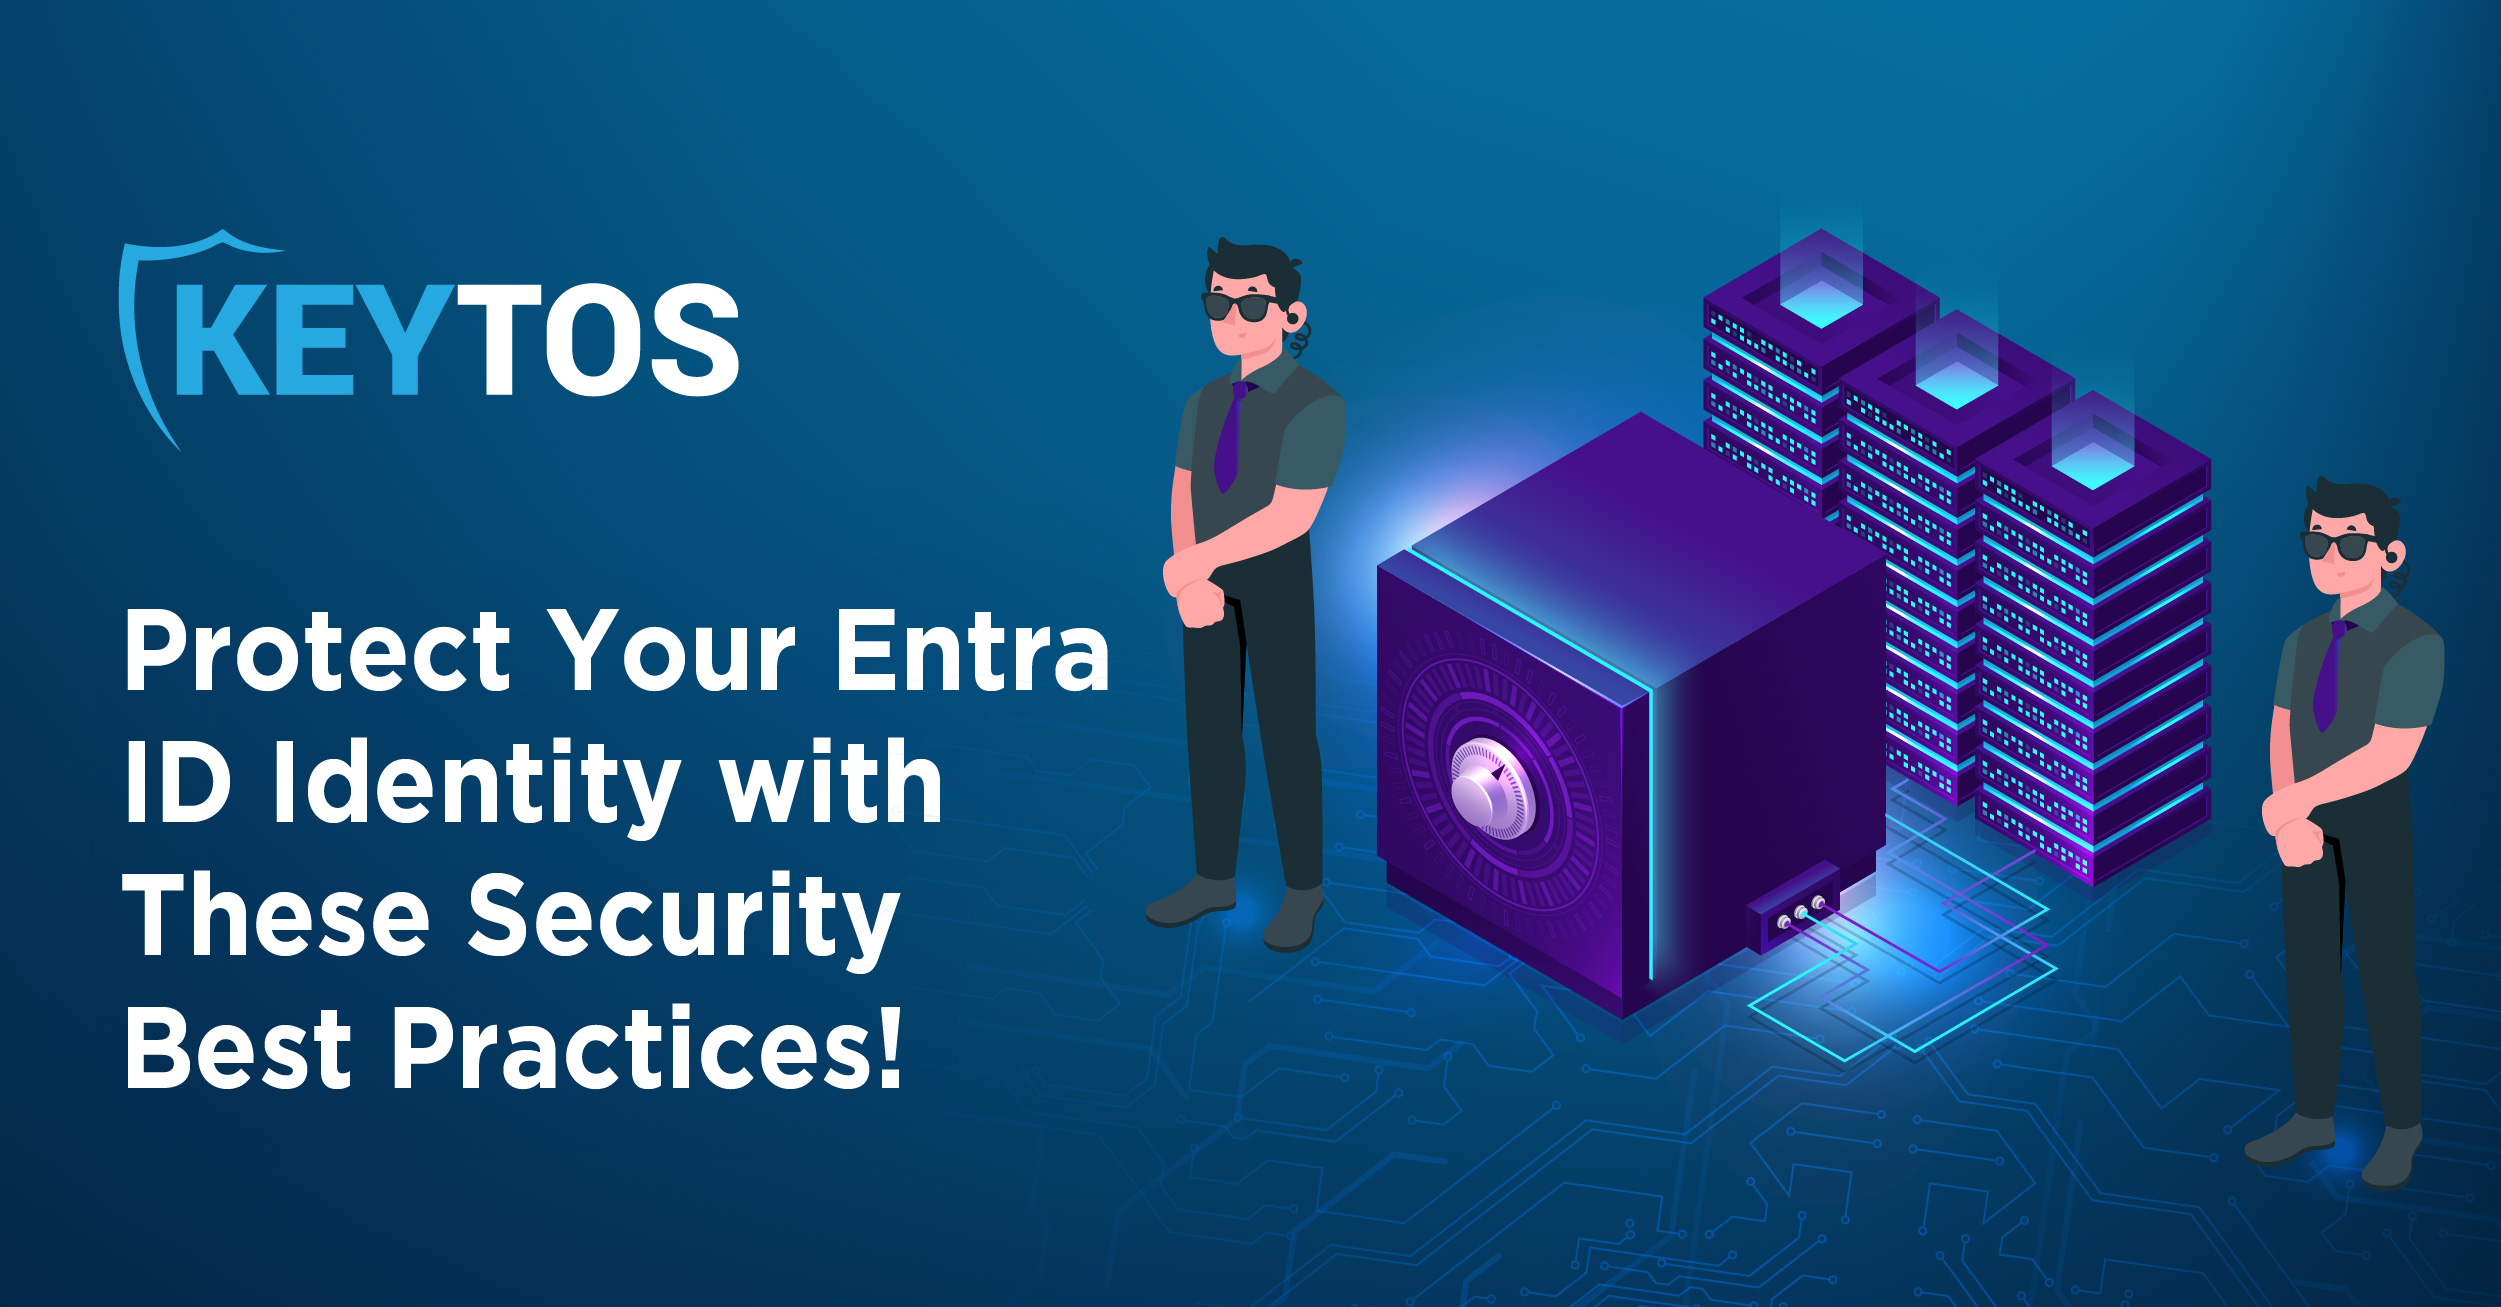 Entra ID Identity Security Best Practices